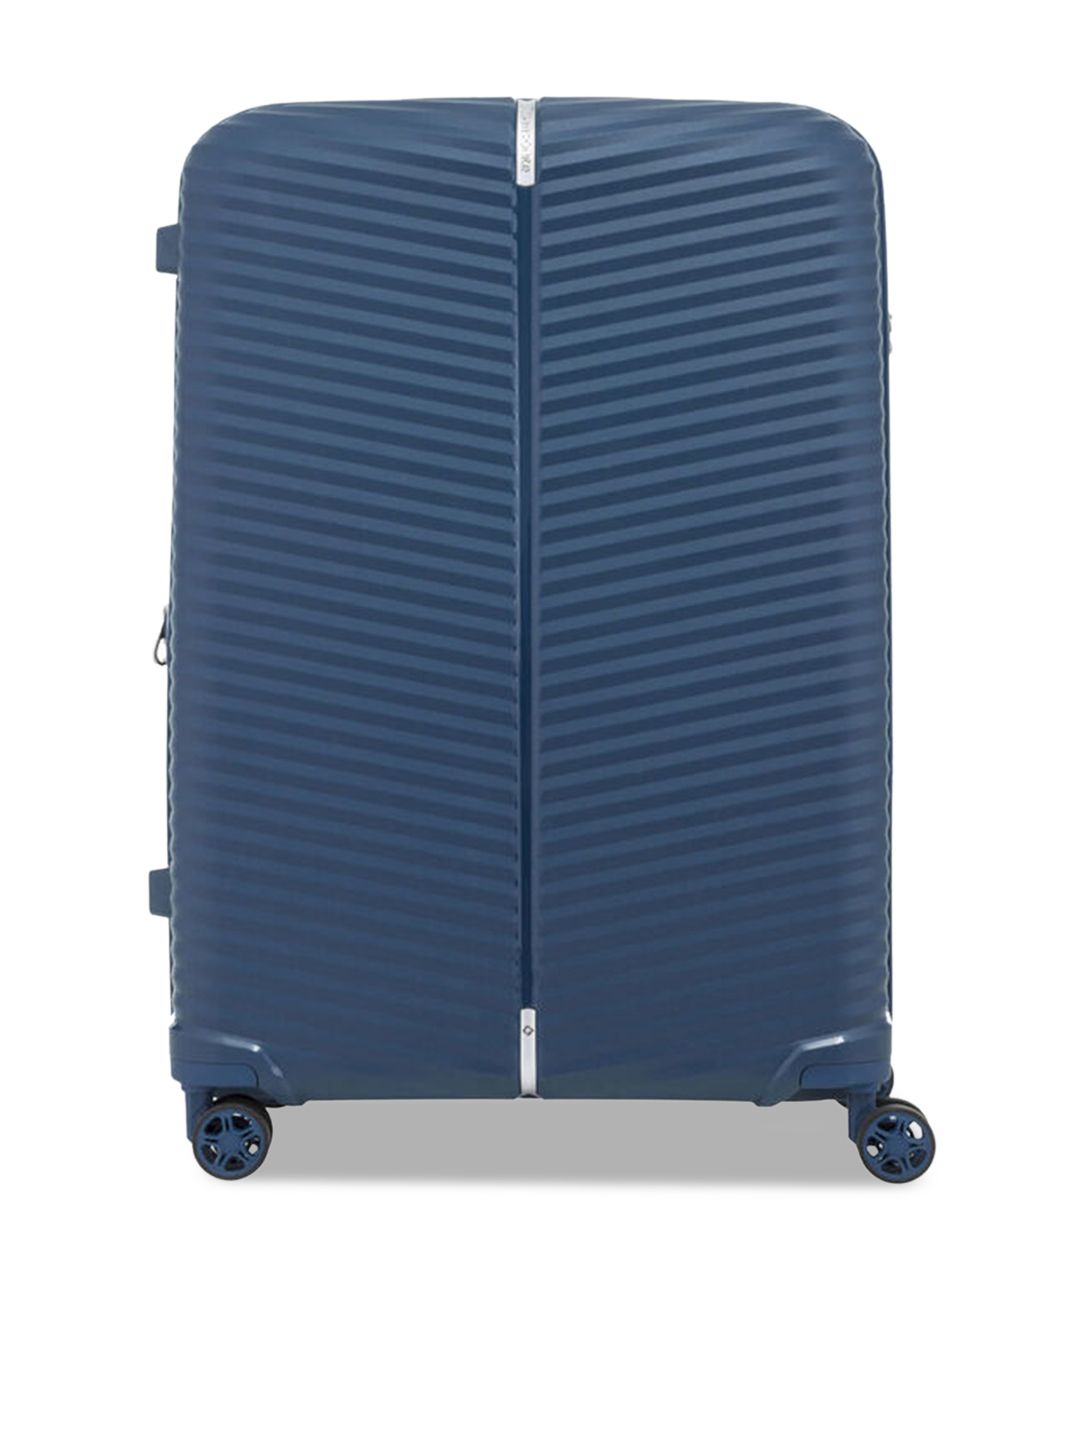 Samsonite Blue Textured Hard-Sided Trolley Suitcase Price in India